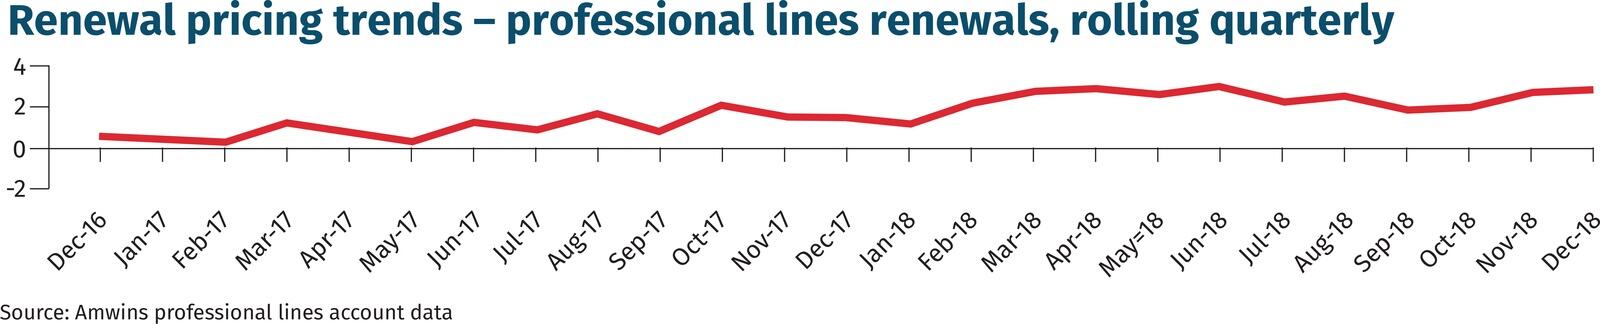 Renewal pricing trends – professional lines